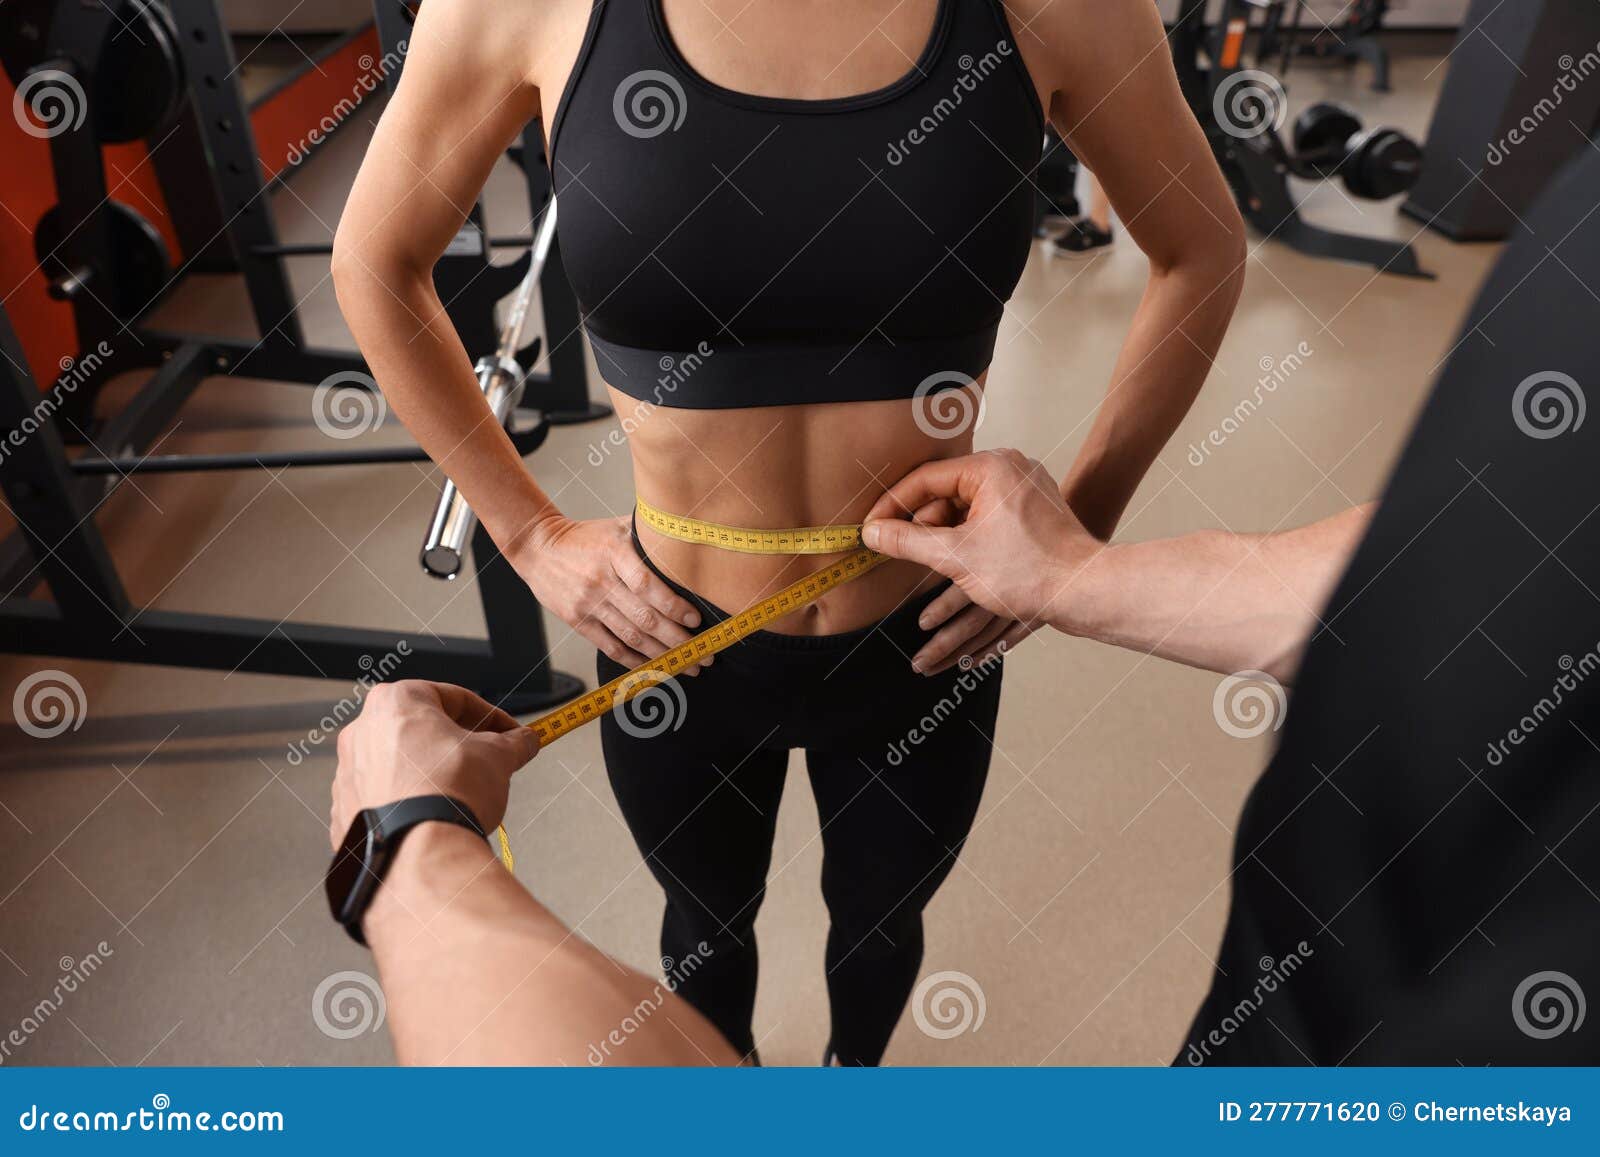 trainer measuring woman`s waist with tape in gym, closeup